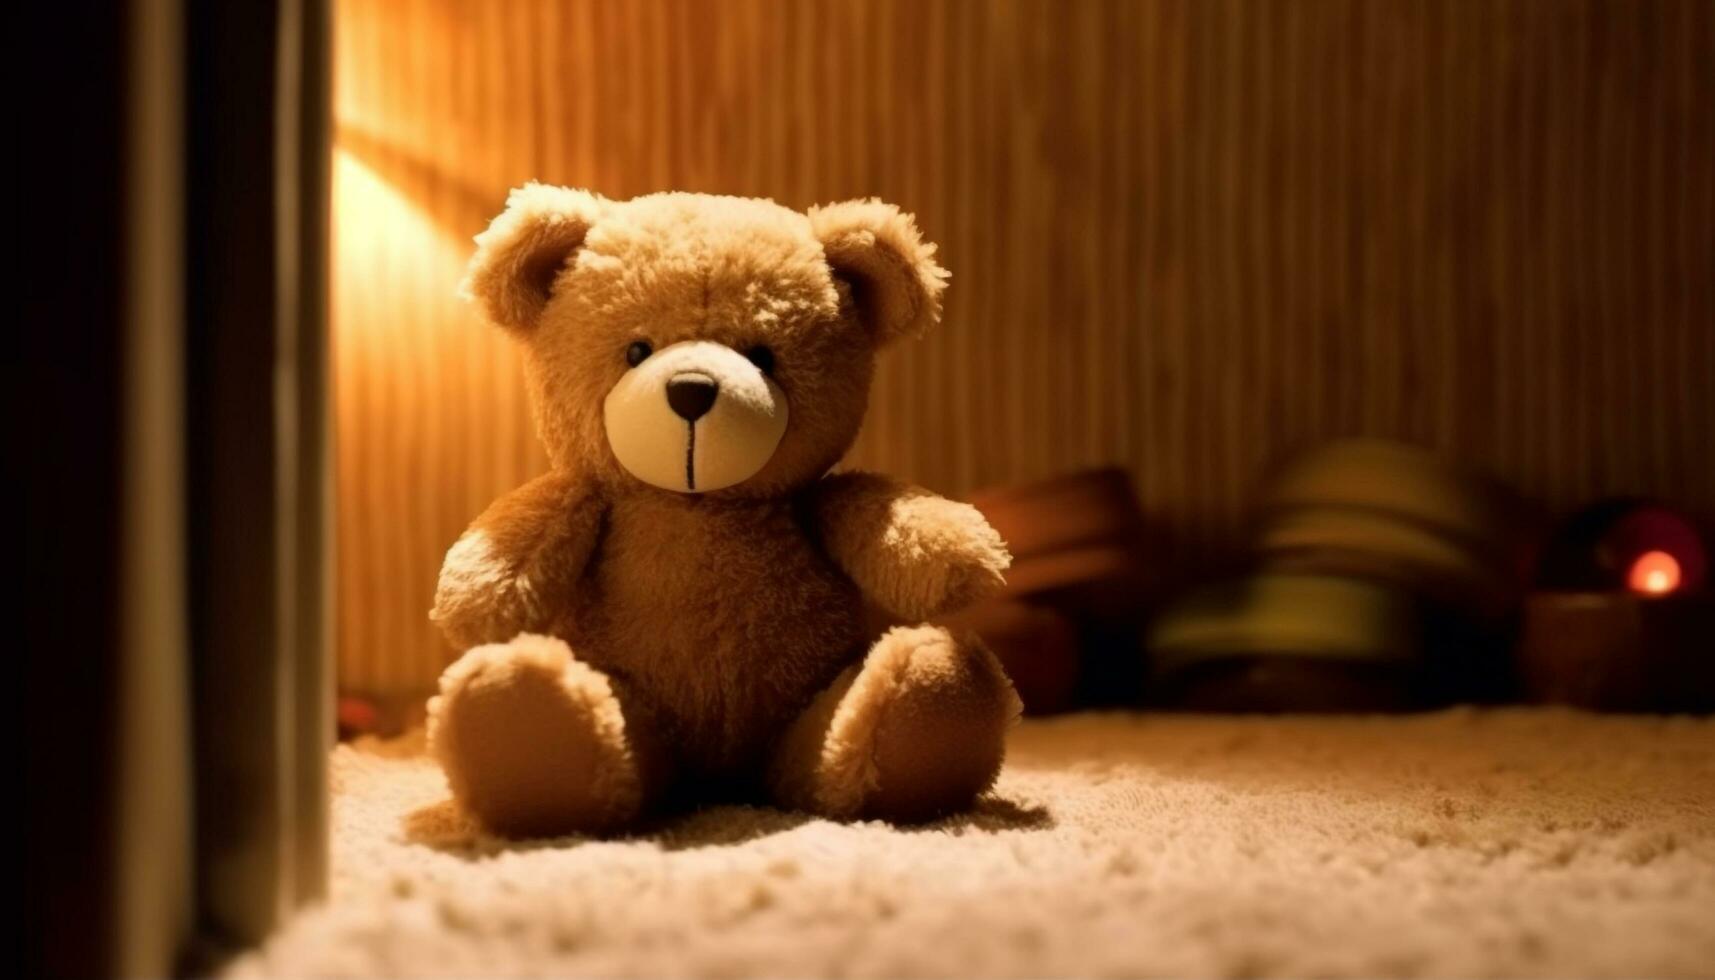 Fluffy teddy bear brings joy and love to a child generated by AI photo